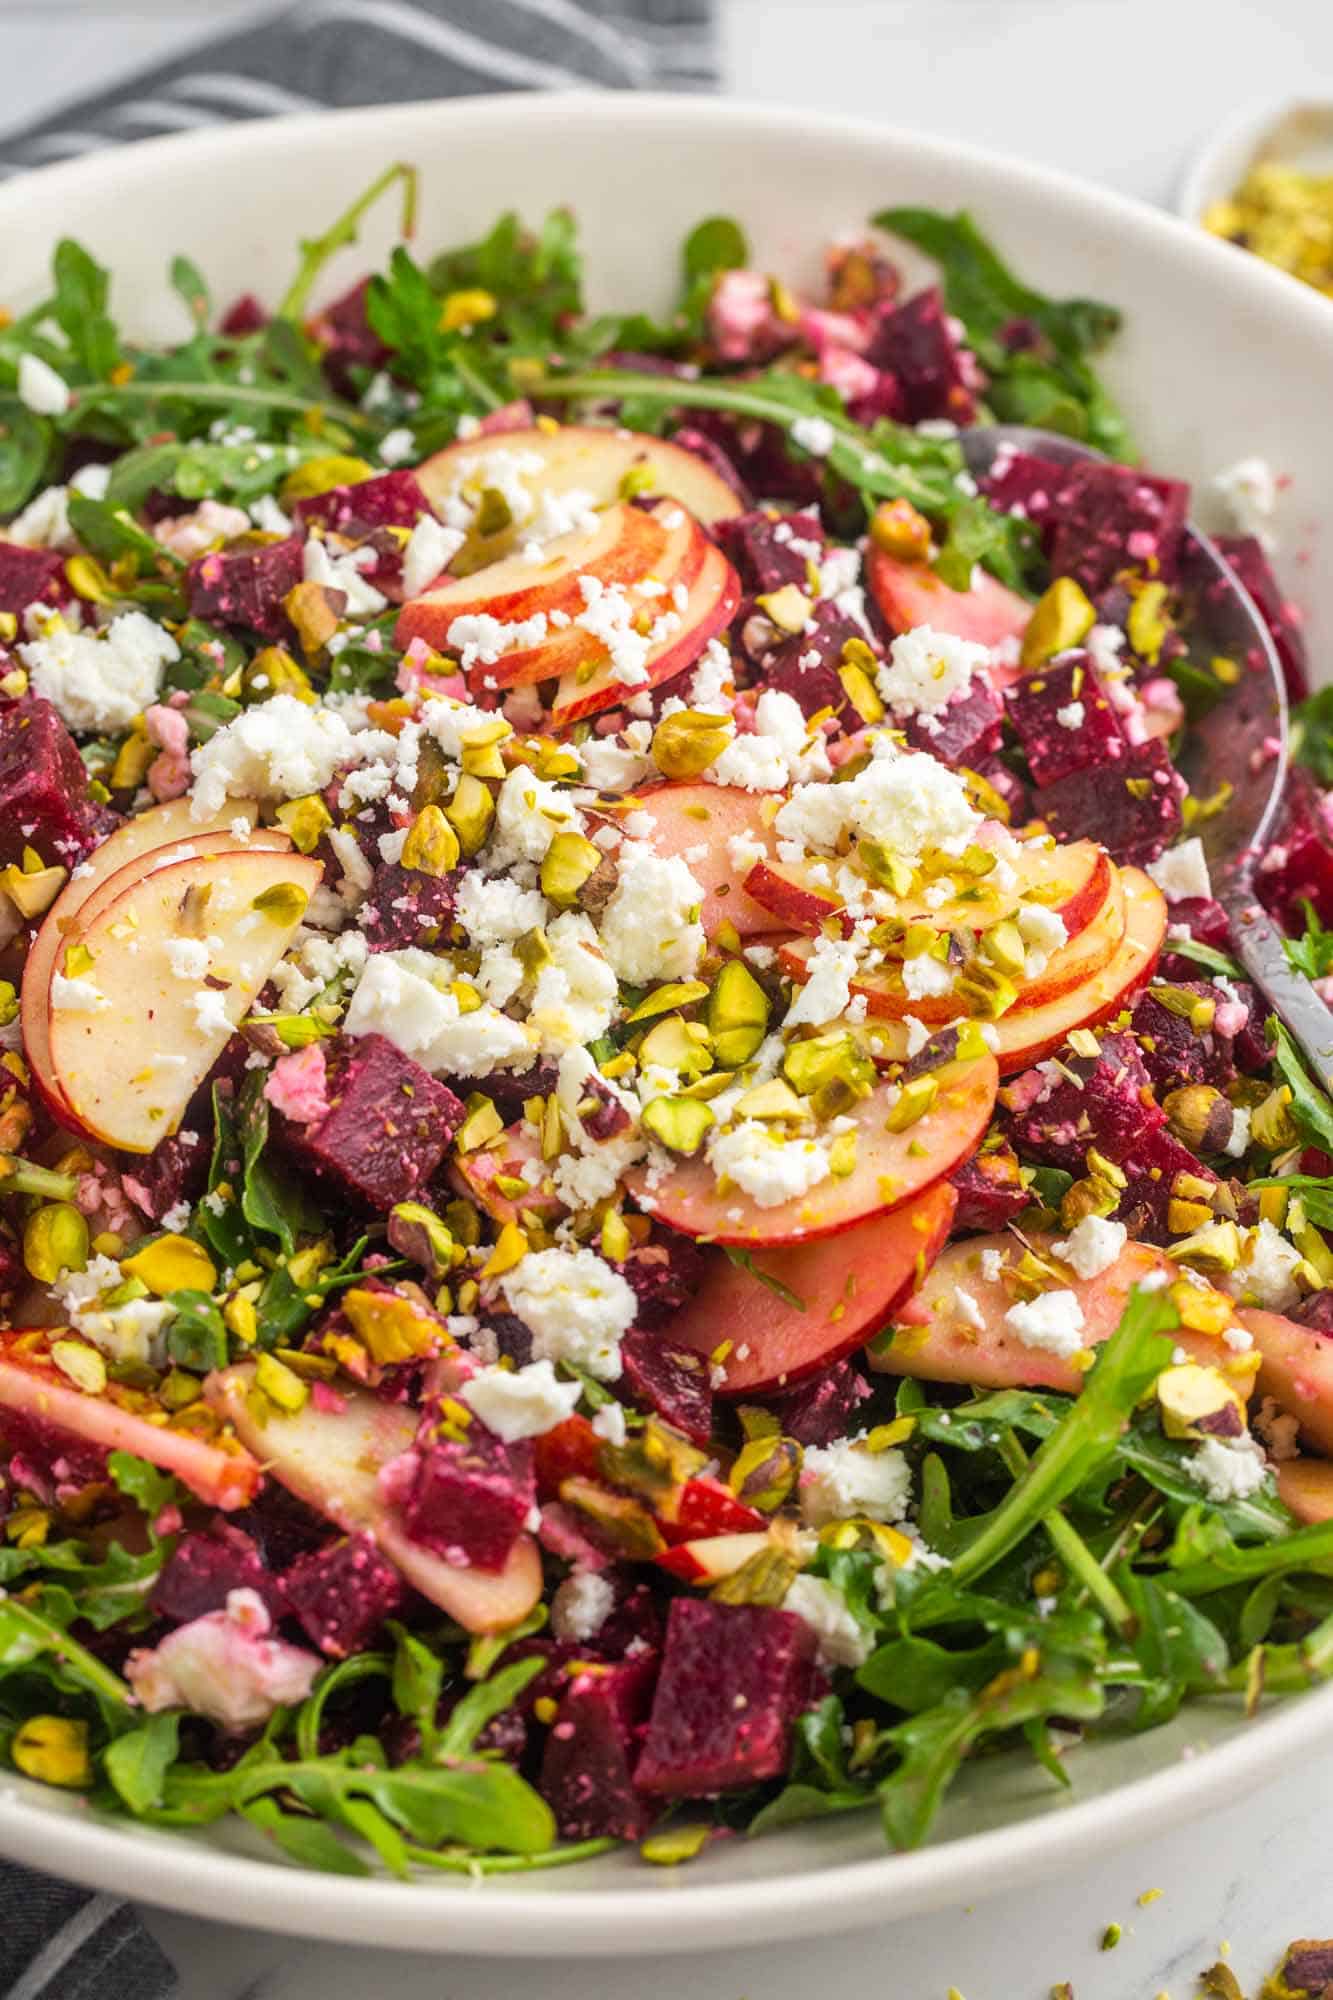 Beet Salad with apple slices, arugula, pistachio, and crumbled feta.